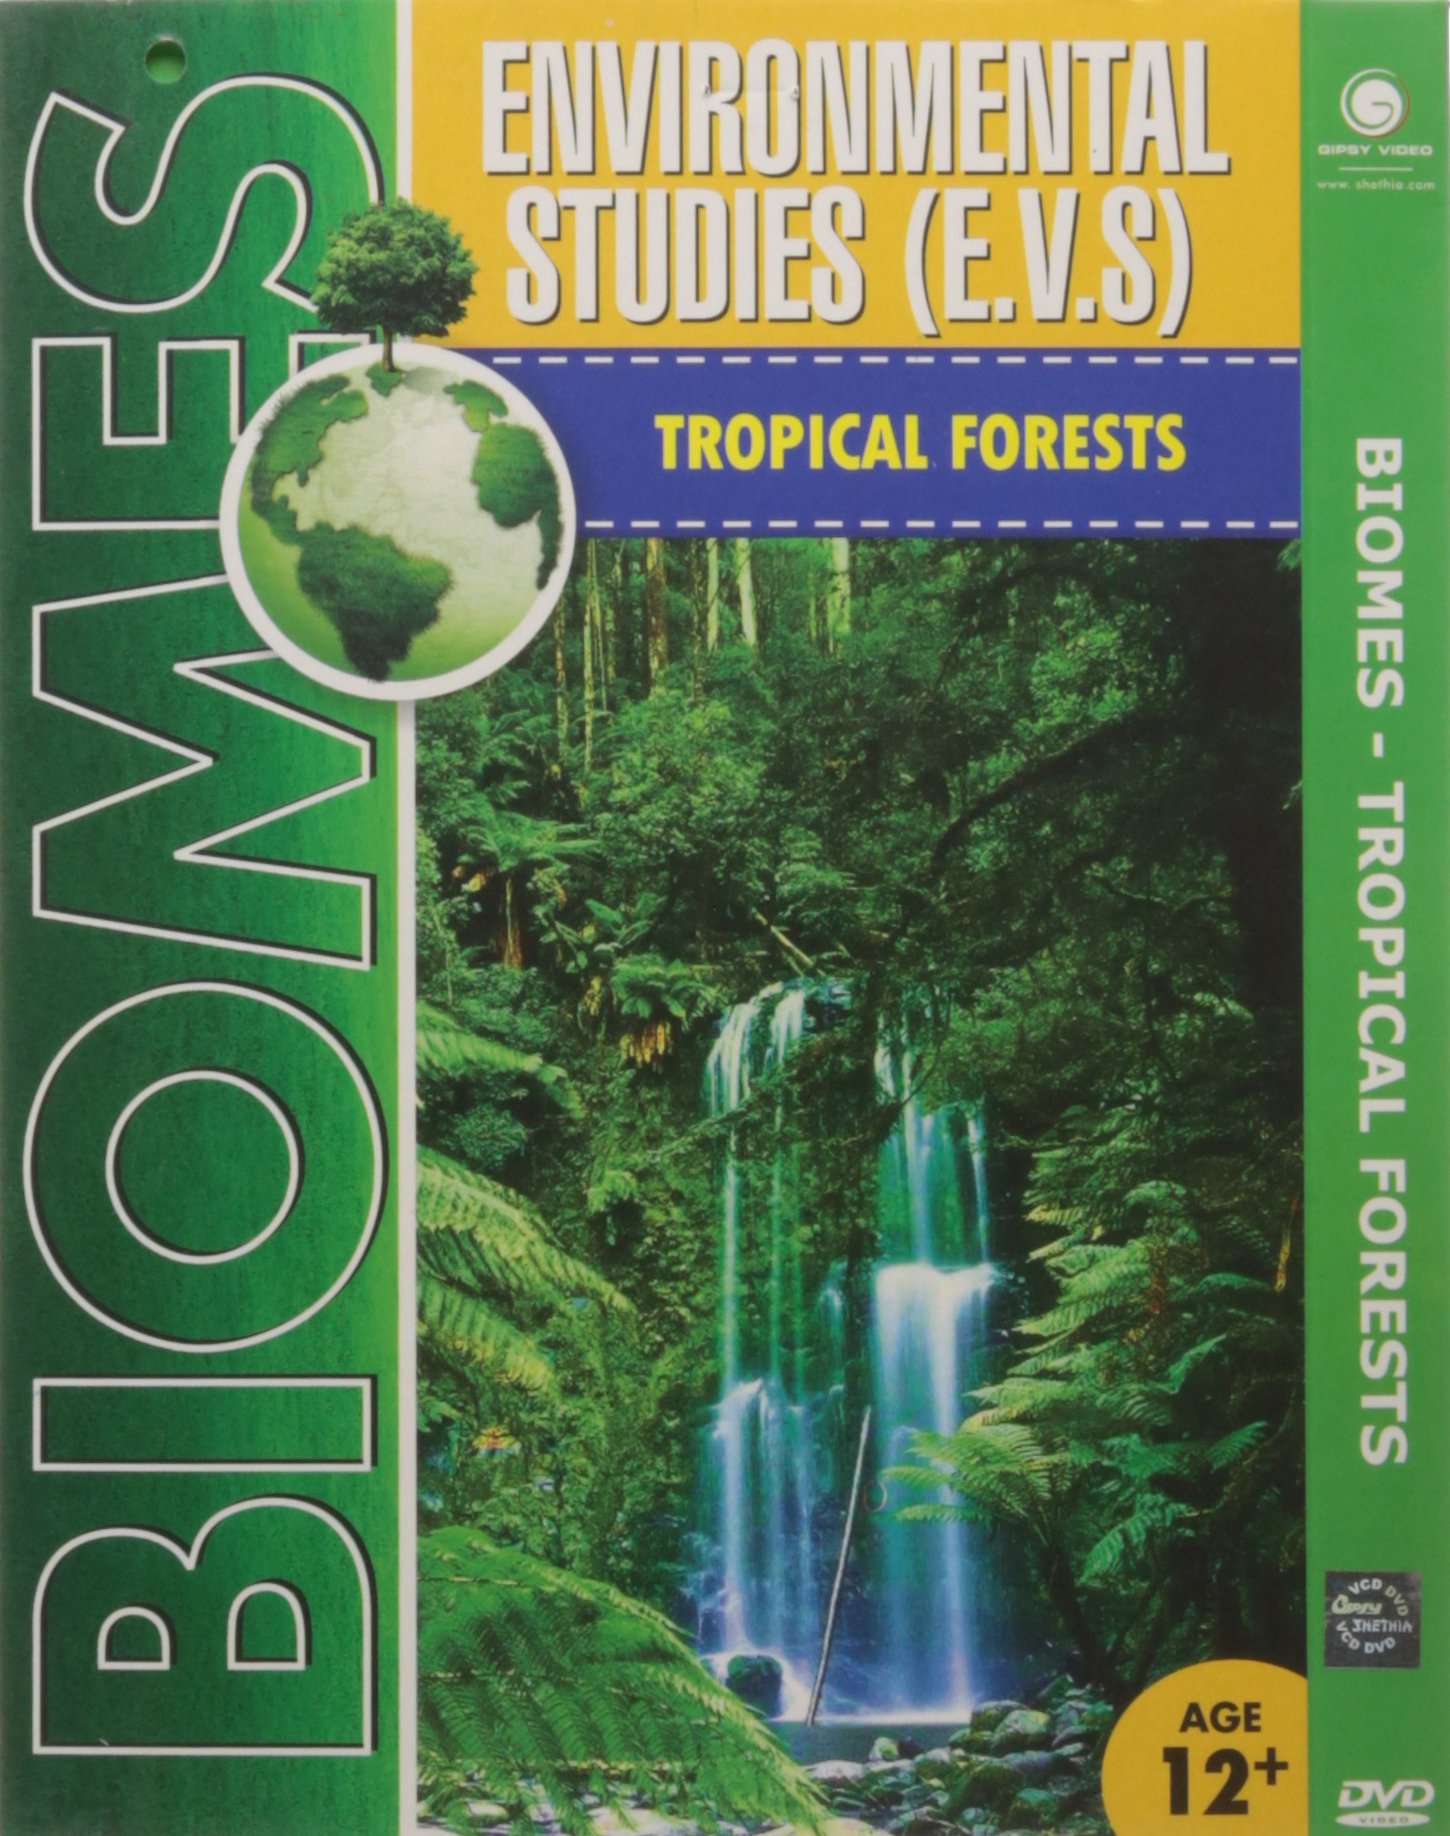 biomes-tropical-forests-movie-purchase-or-watch-online